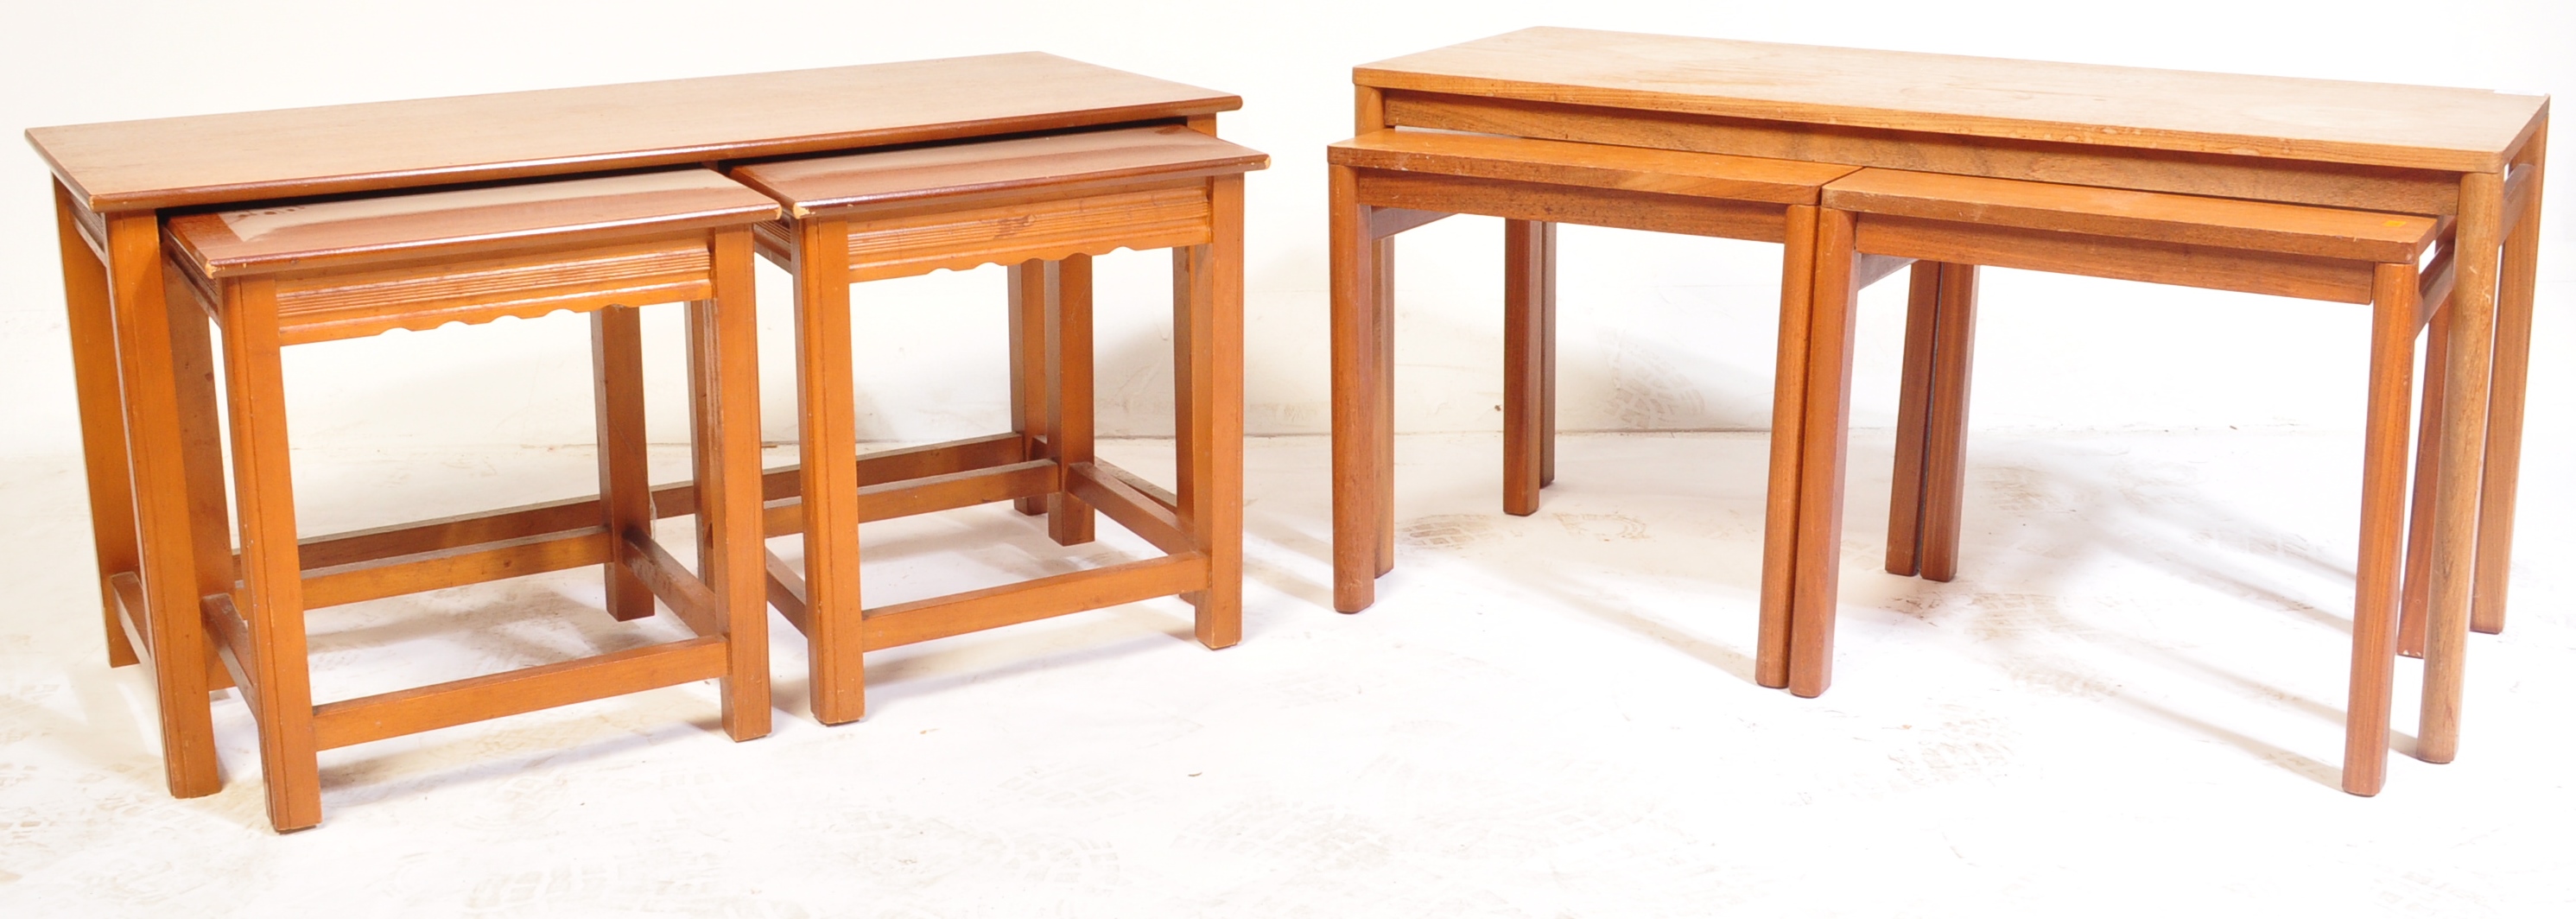 TWO RETRO VINTAGE MID 20TH CENTURY 1960S TEAK WOOD NESTS OF TABLES - Image 3 of 4